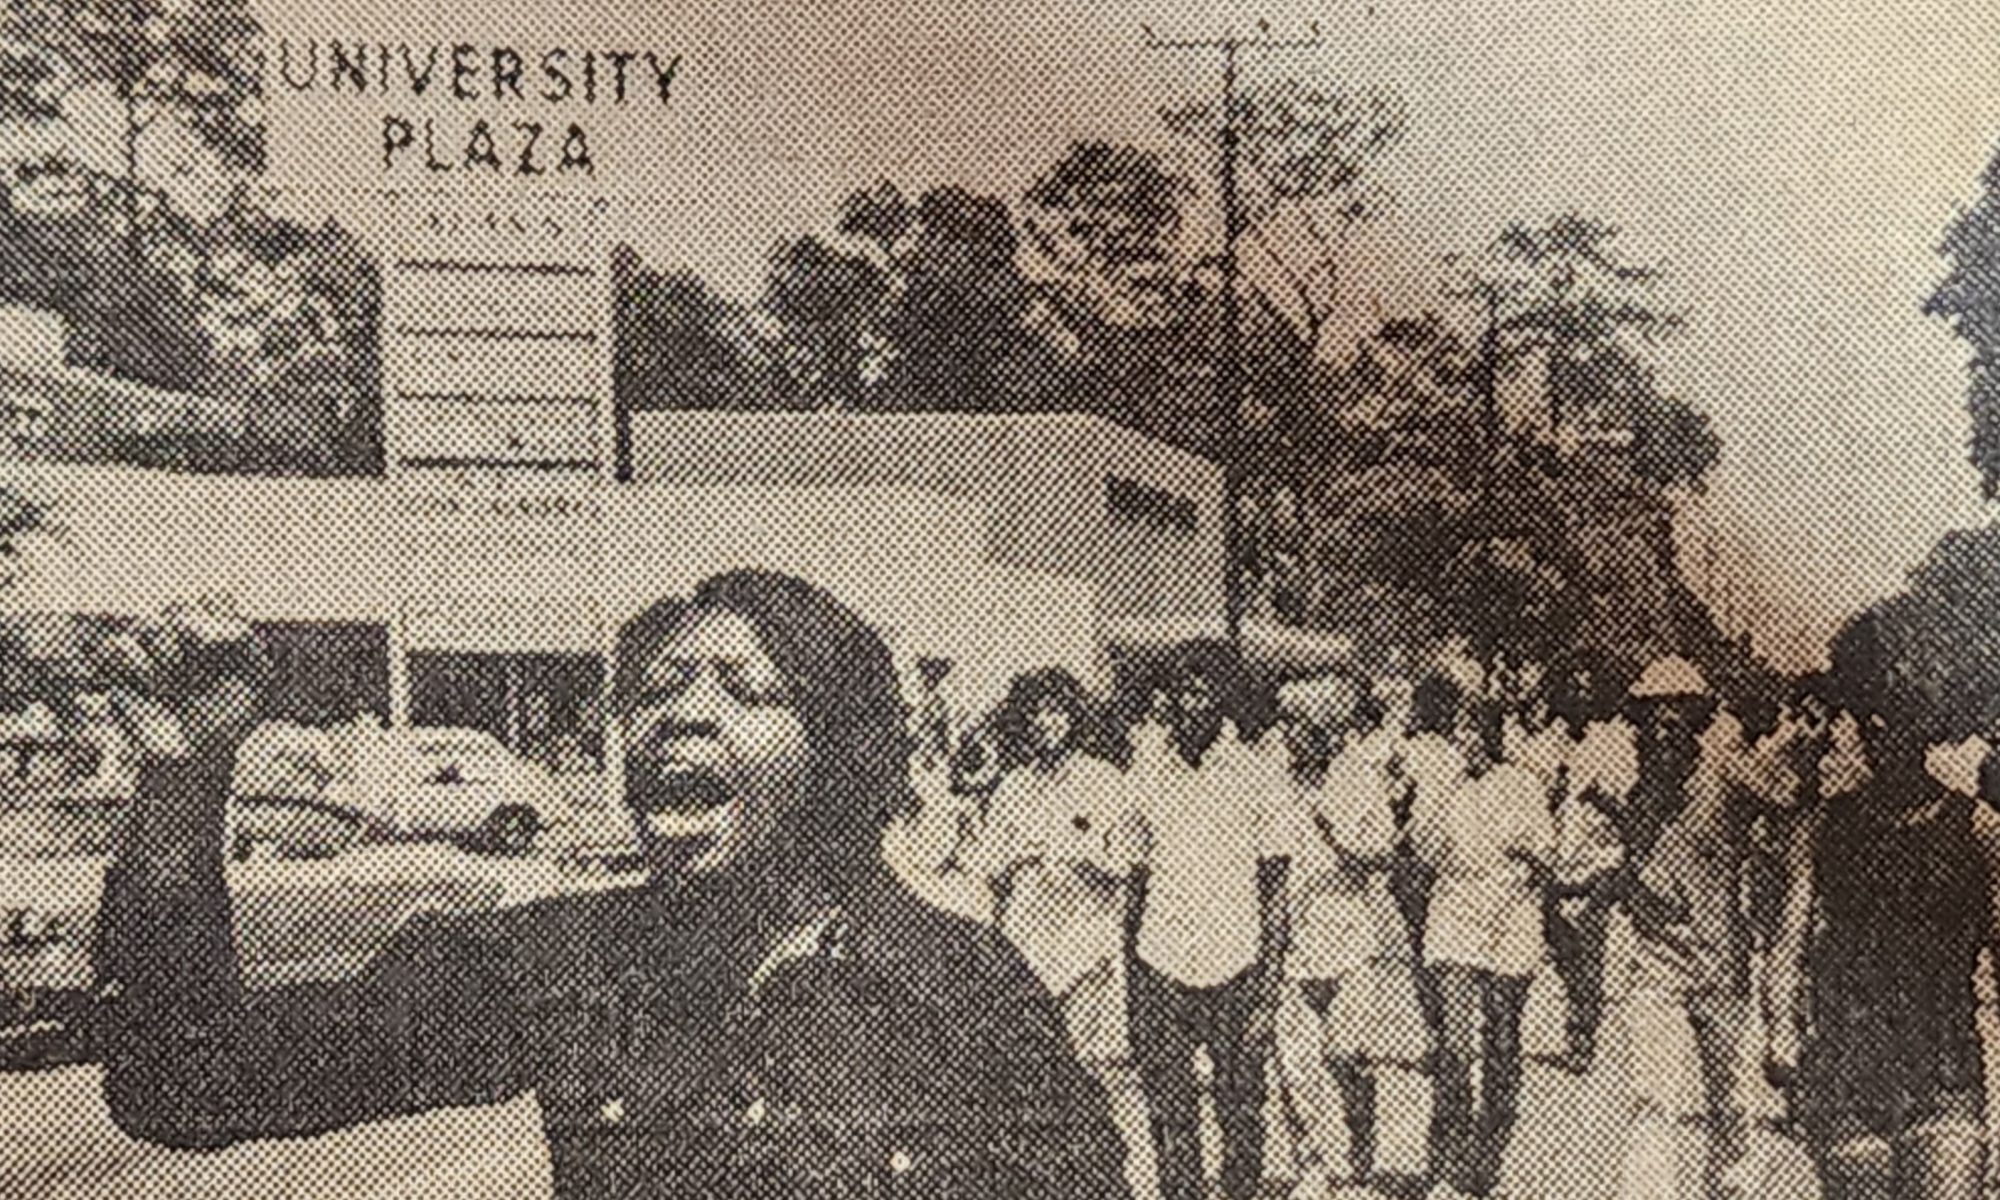 A newspaper photograph of Students protesting on University Avenue